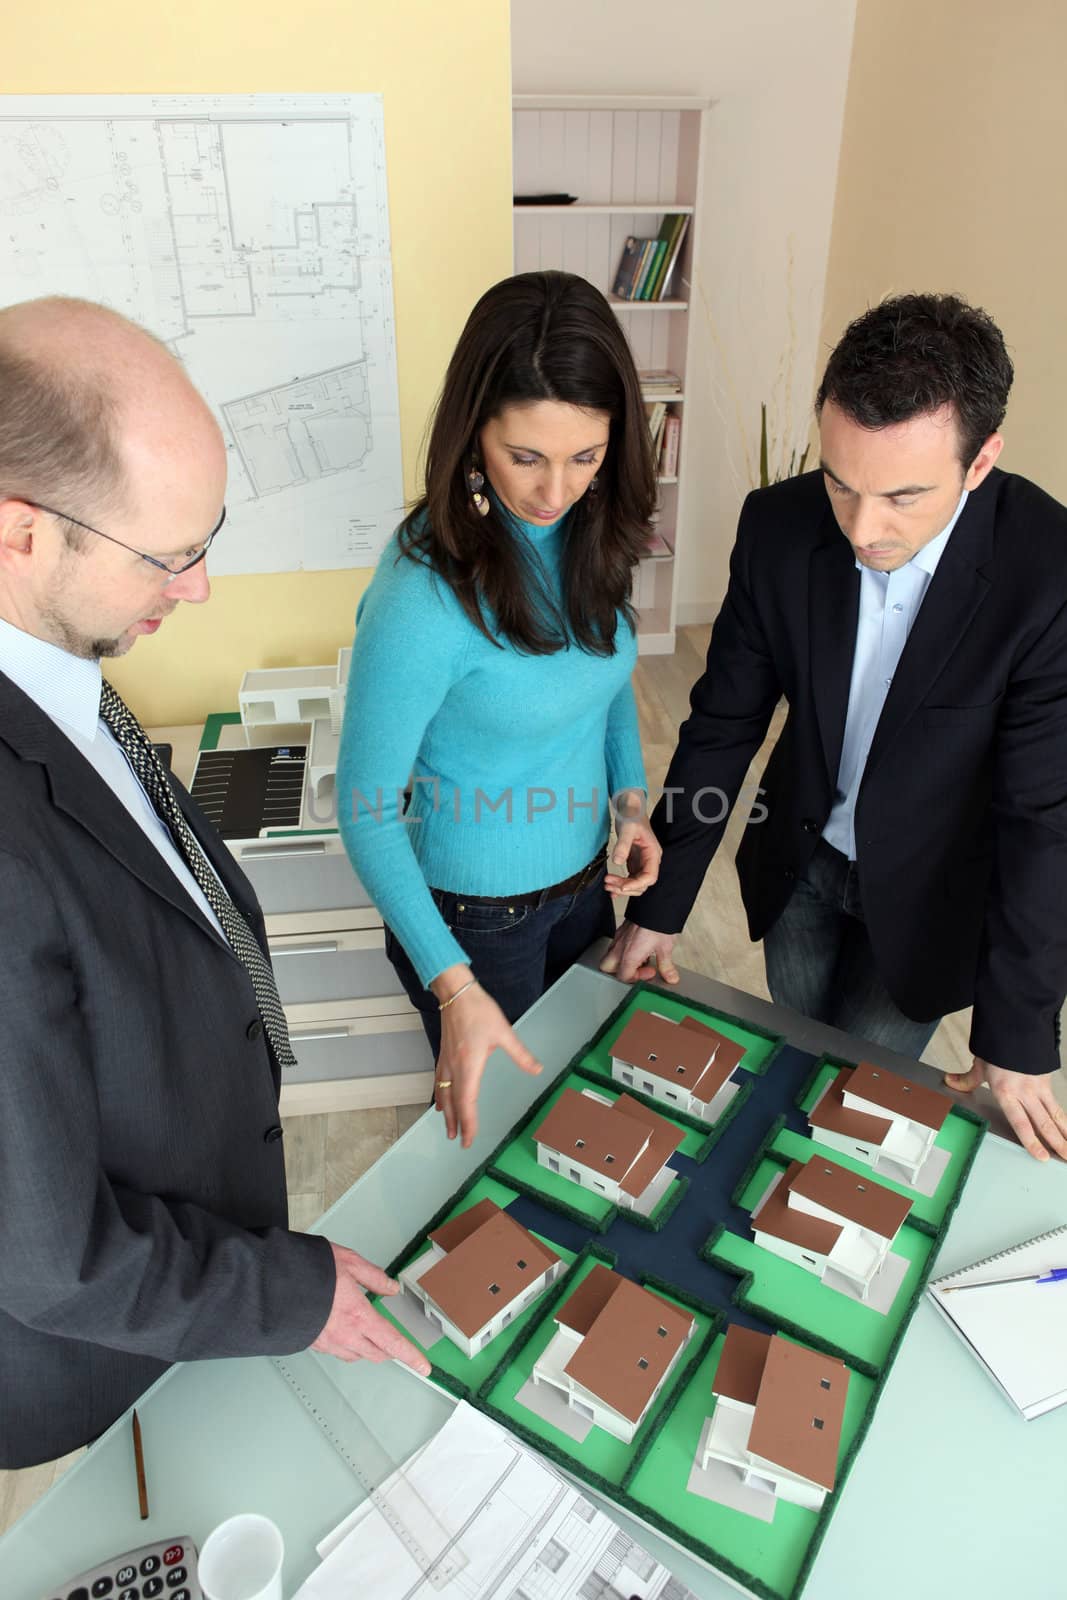 Architect with prospective buyers by phovoir